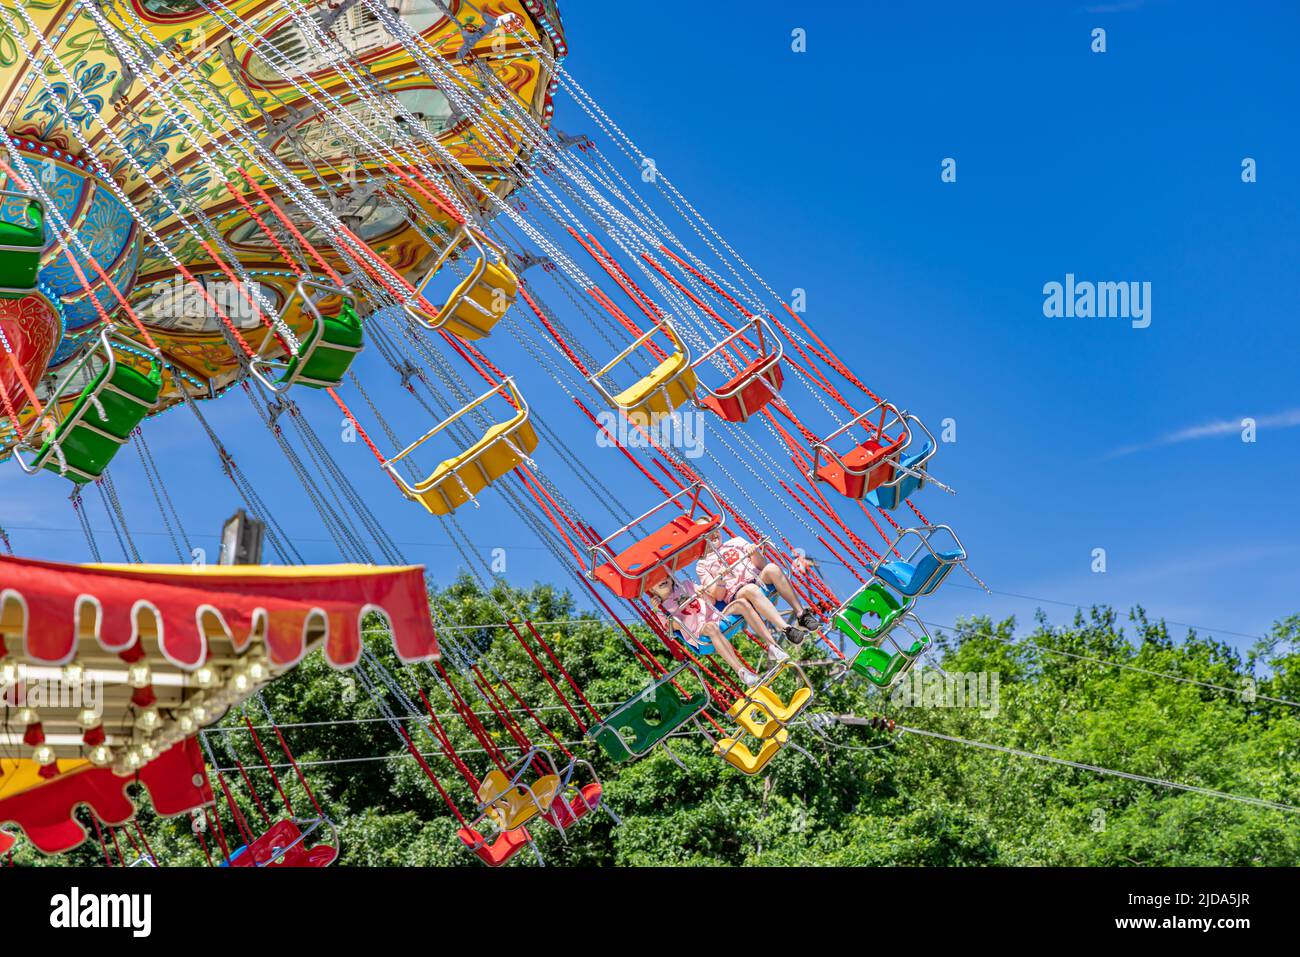 detail image of a carnival ride Stock Photo